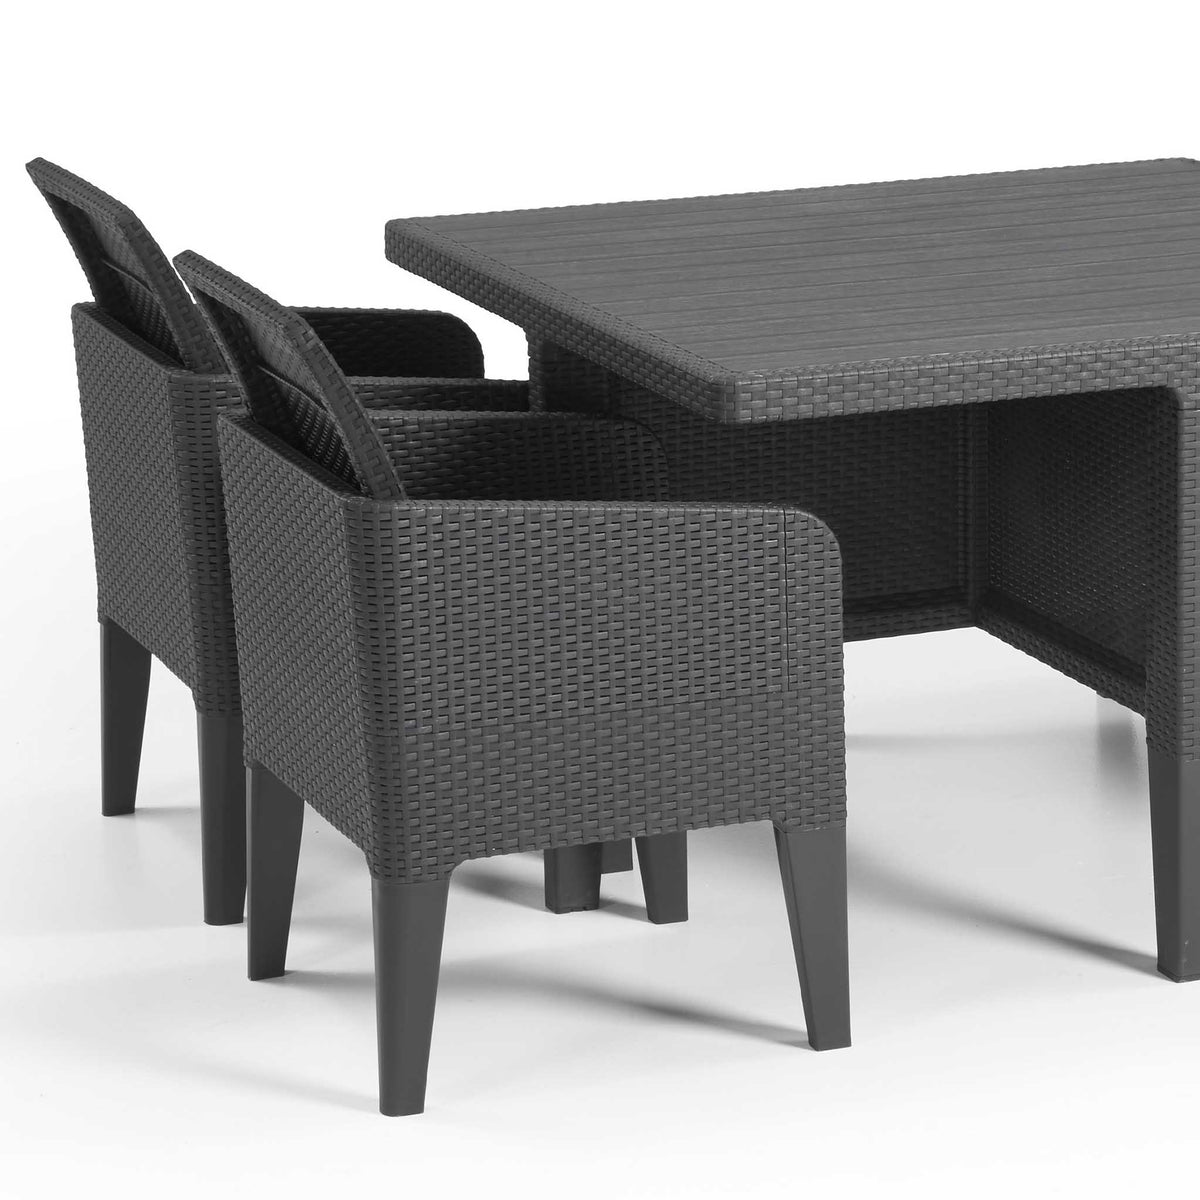 Keter Dine Out 4 Seater Dining Set - Close up of Chair when pulled out